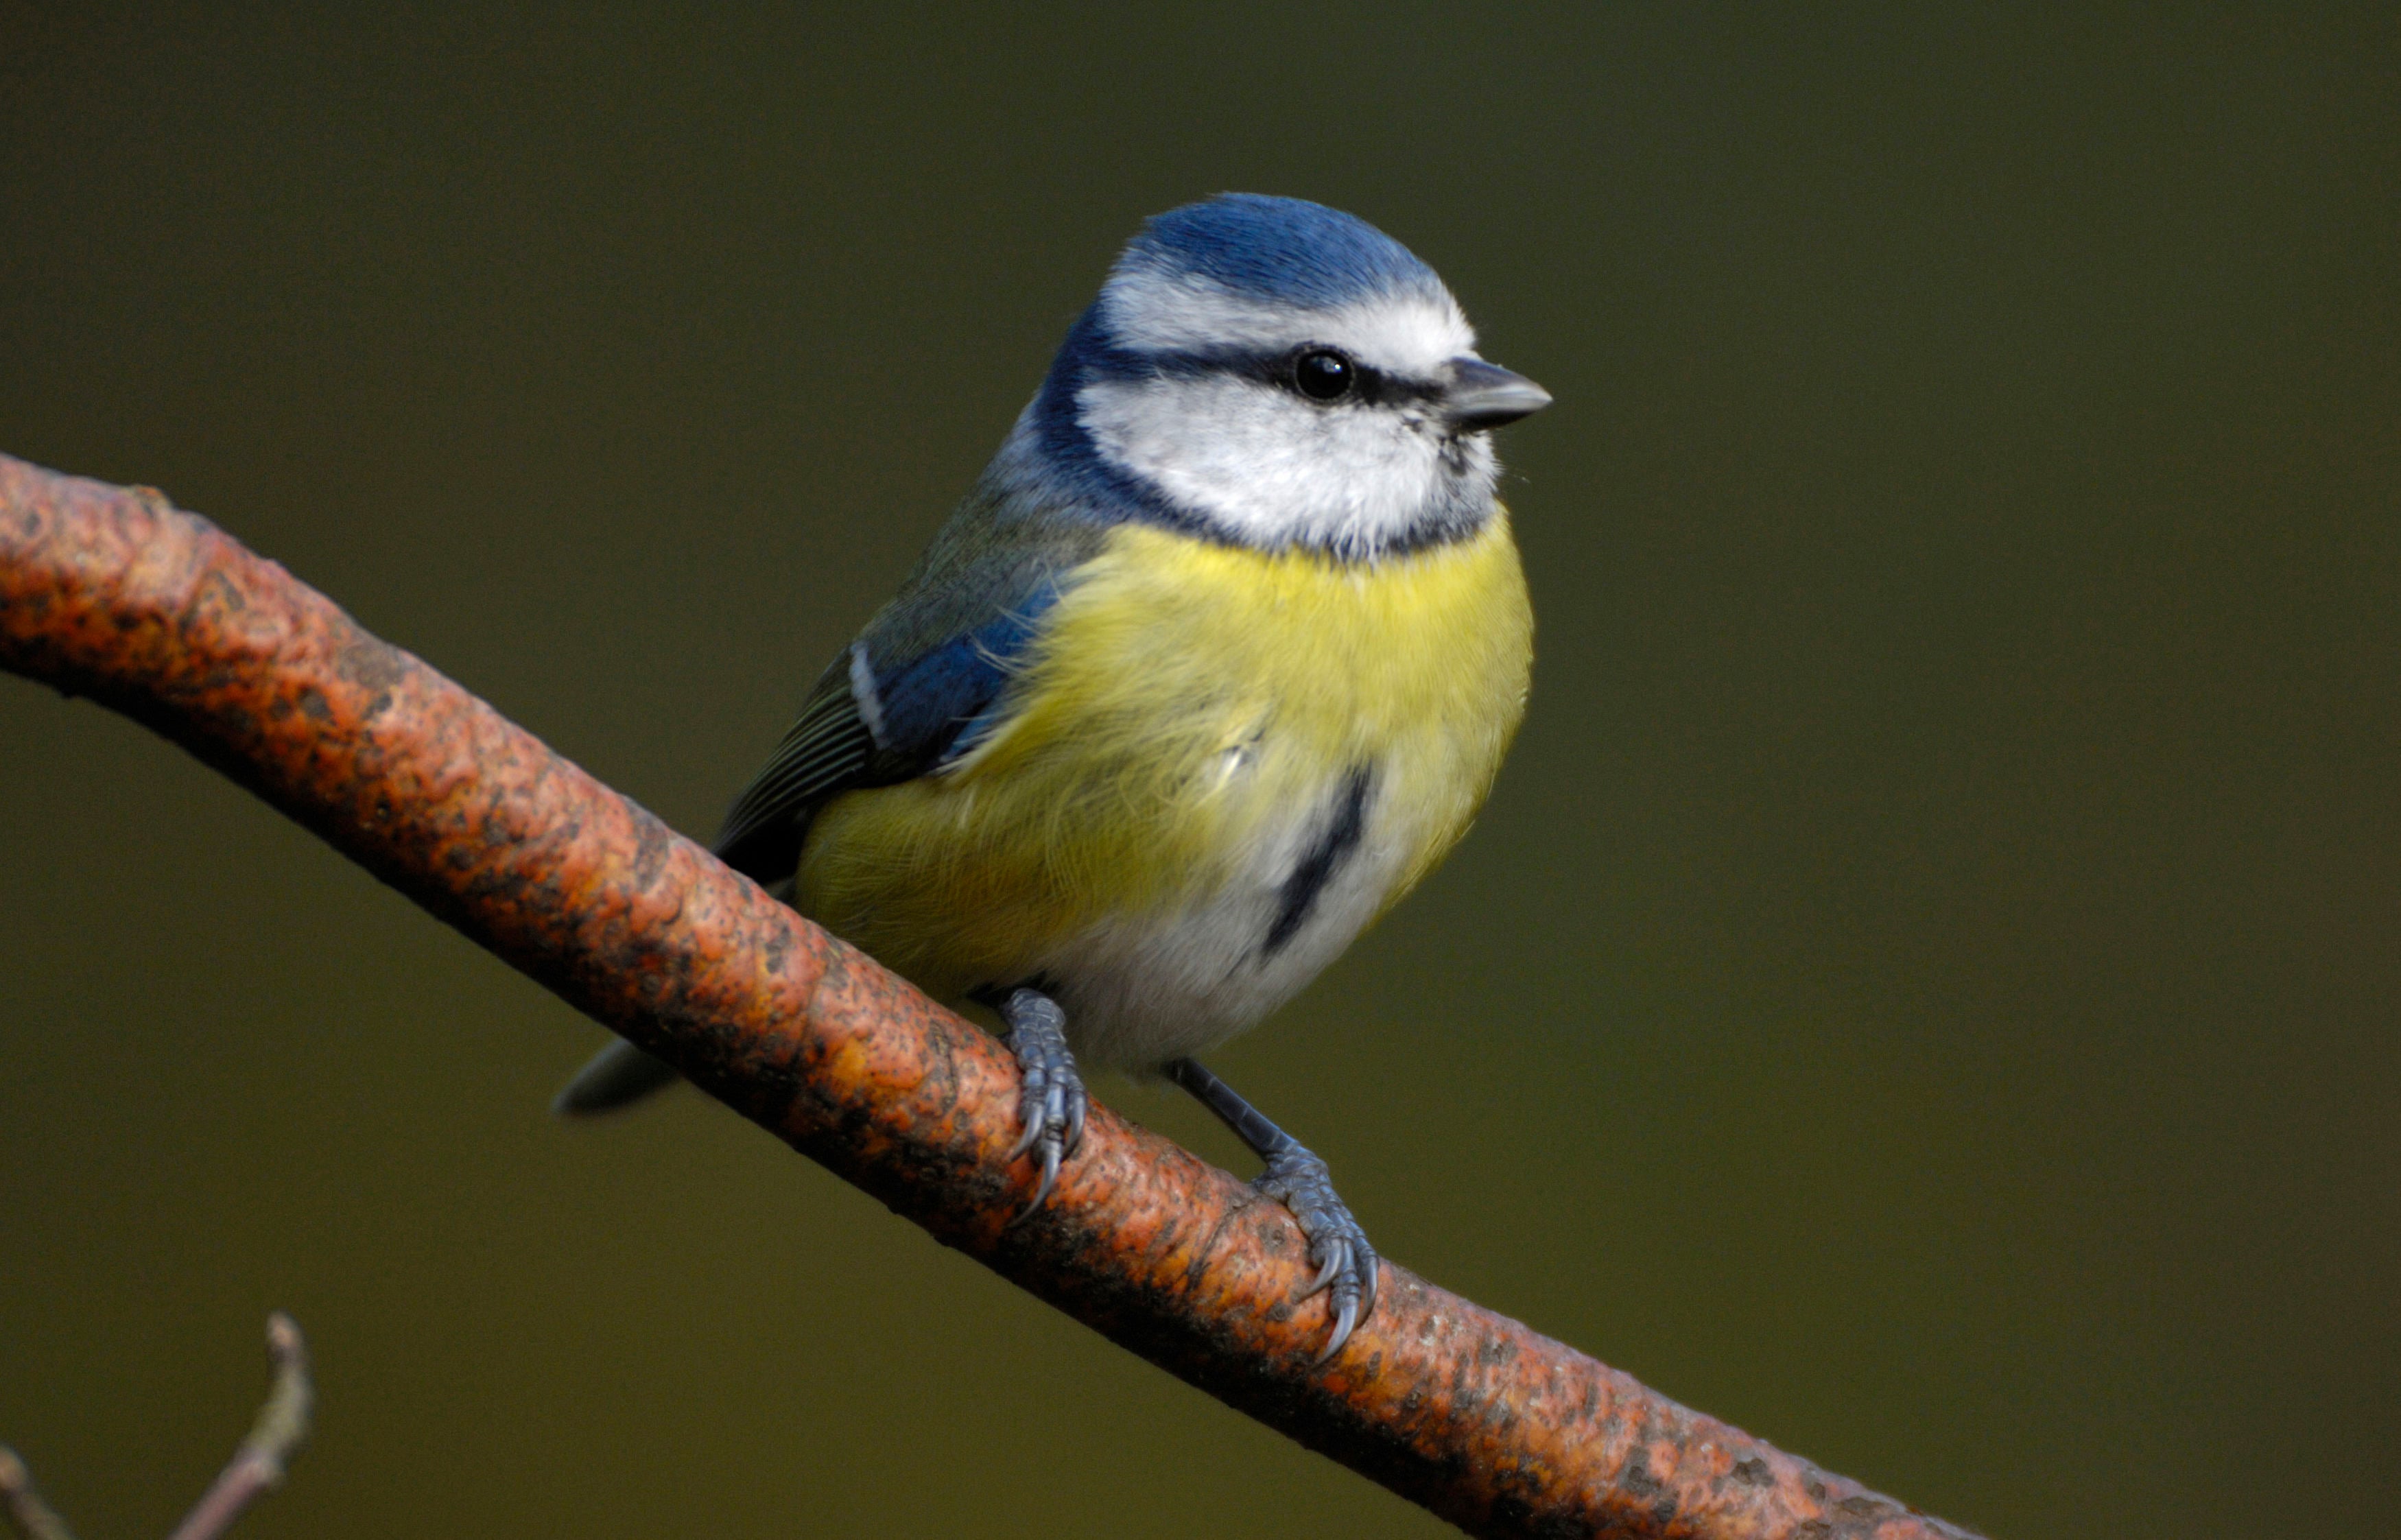 Blue tits are one of the common birds recorded in the survey (Ray Kennedy/RSPB/PA)